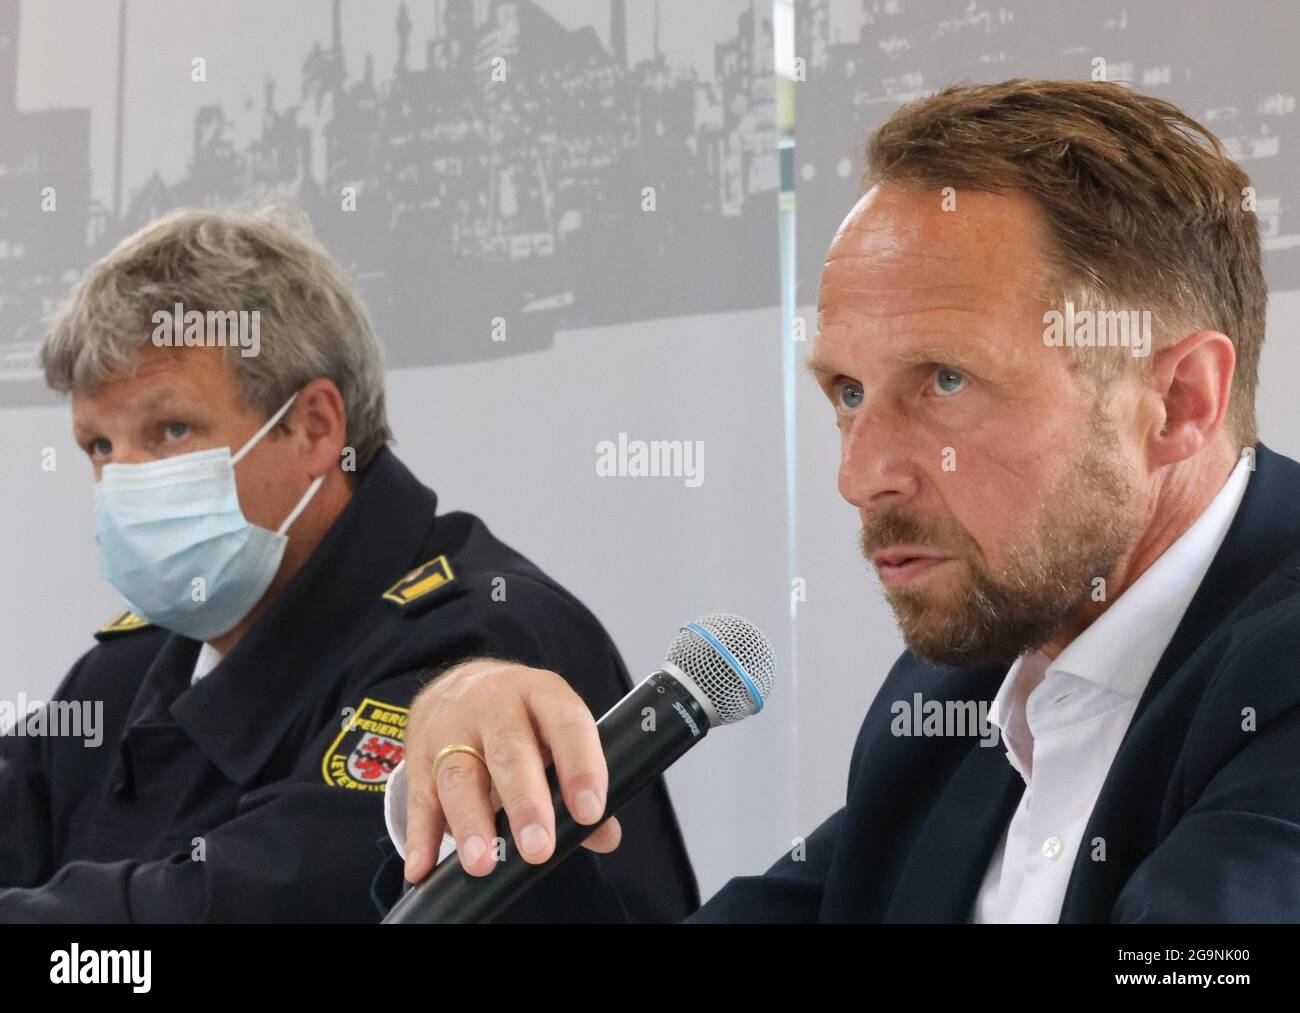 Leverkusen, Germany. 27th July, 2021. Uwe Richrath (SPD, r), Lord Mayor of Leverkusen, speaks next to Stephan Hummel, Head of Fire Protection at Currenta GmbH, at a press conference on the situation after the explosion at Chempark Leverkusen. After the devastating explosion at the Chempark with one dead and 16 injured there is still a hazardous situation. Credit: Oliver Berg/dpa/Alamy Live News Stock Photo